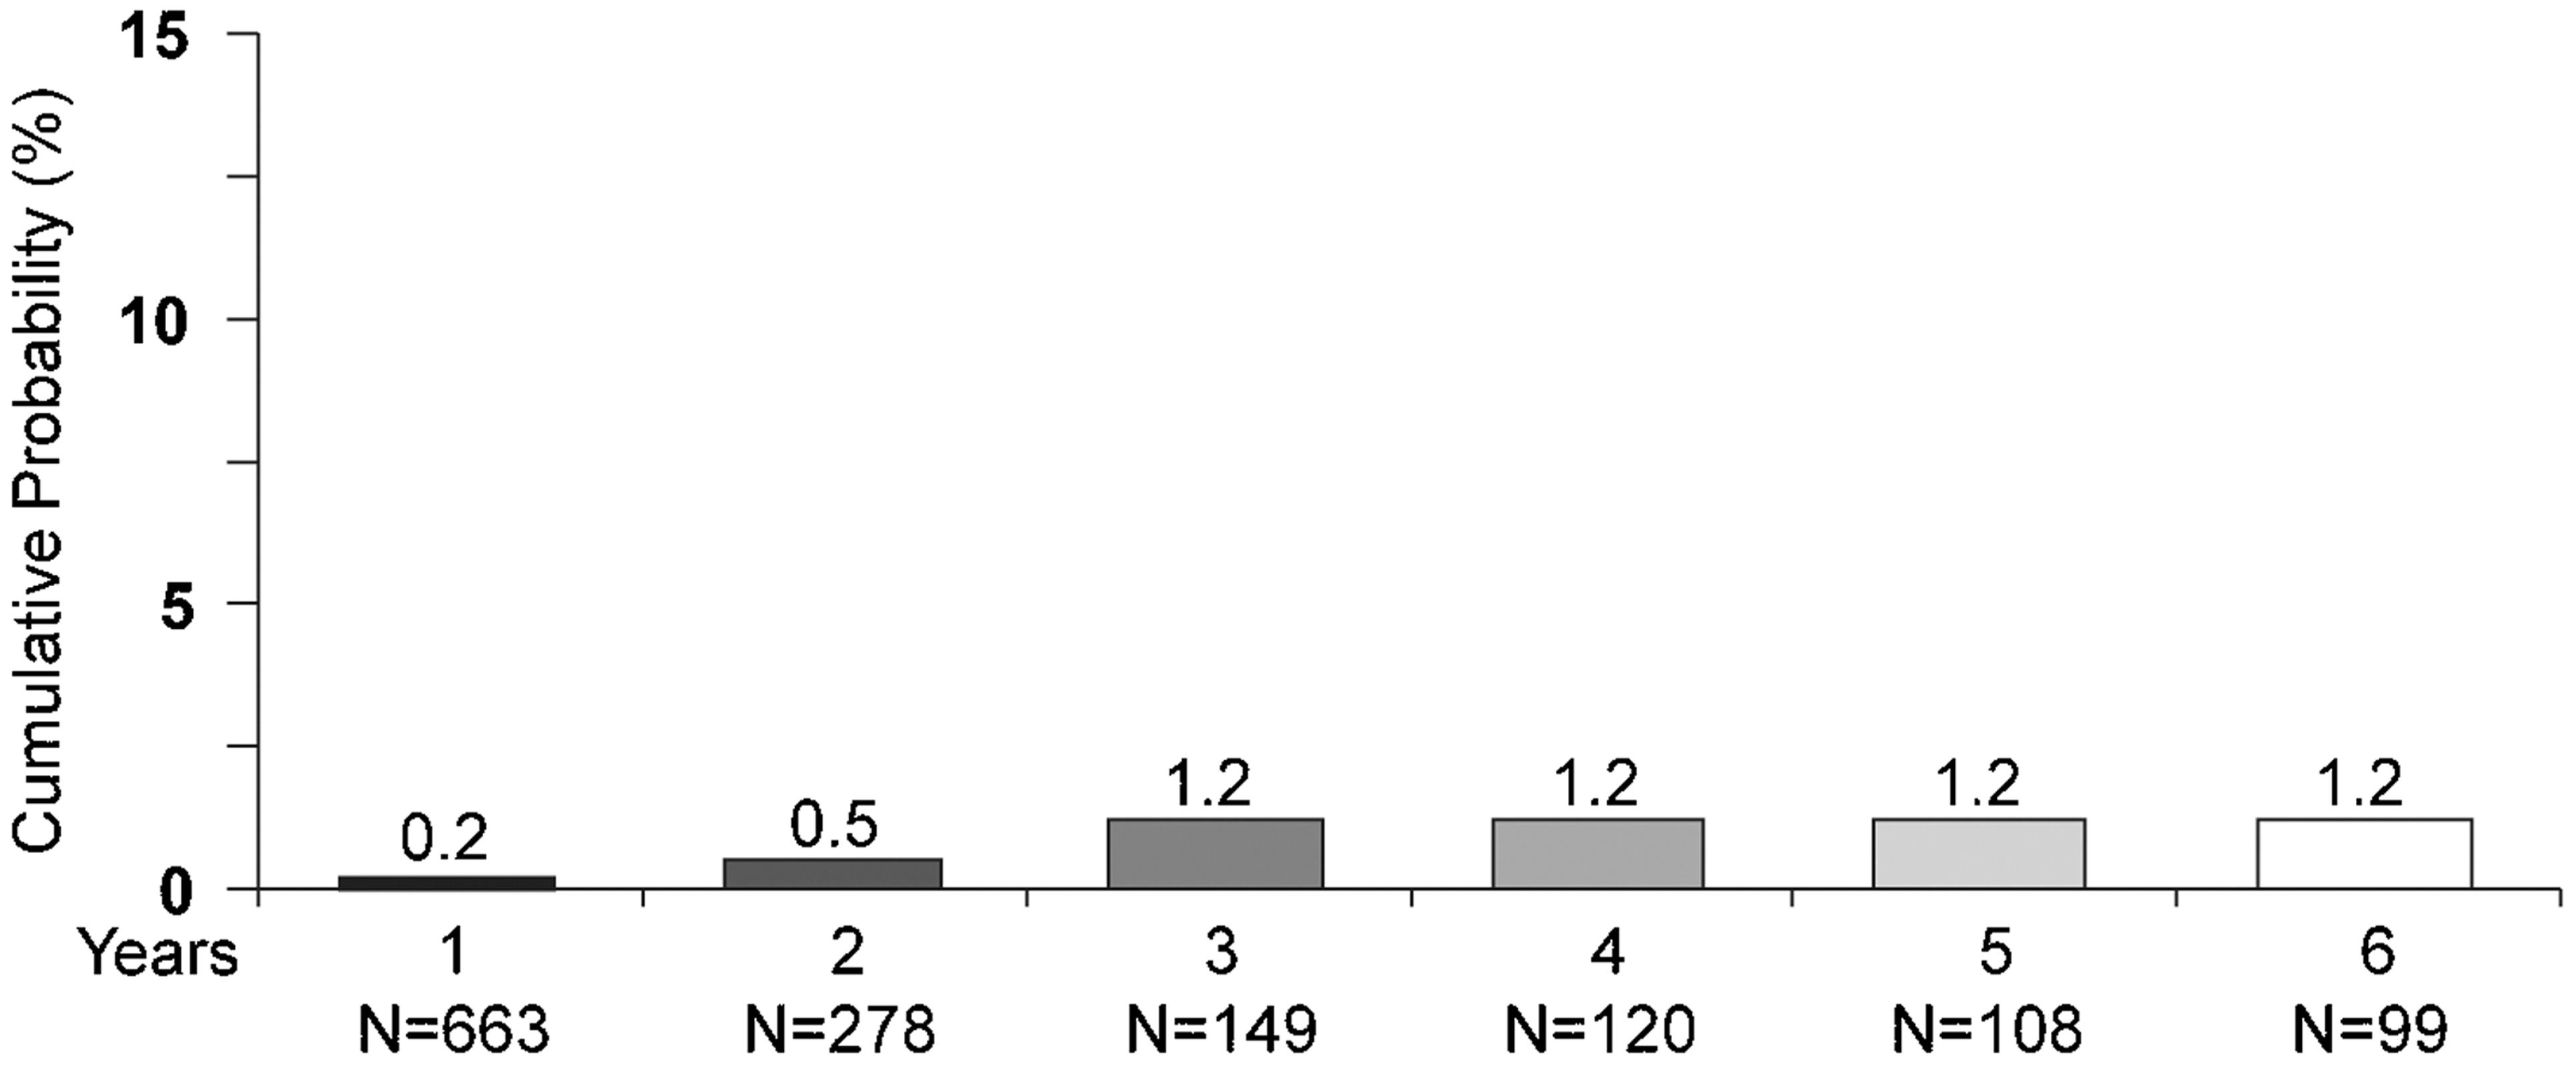 Cumulative probability of entecavir resistance (rtT184, rtS202, or rtM250) in the presence of lamivudine-resistance mutations (rtM204 and rtL180M) among nucleoside-naive hepatis Be antigen (HBeAg)-positive and HBeAg-negative patients during 6 years of treatment